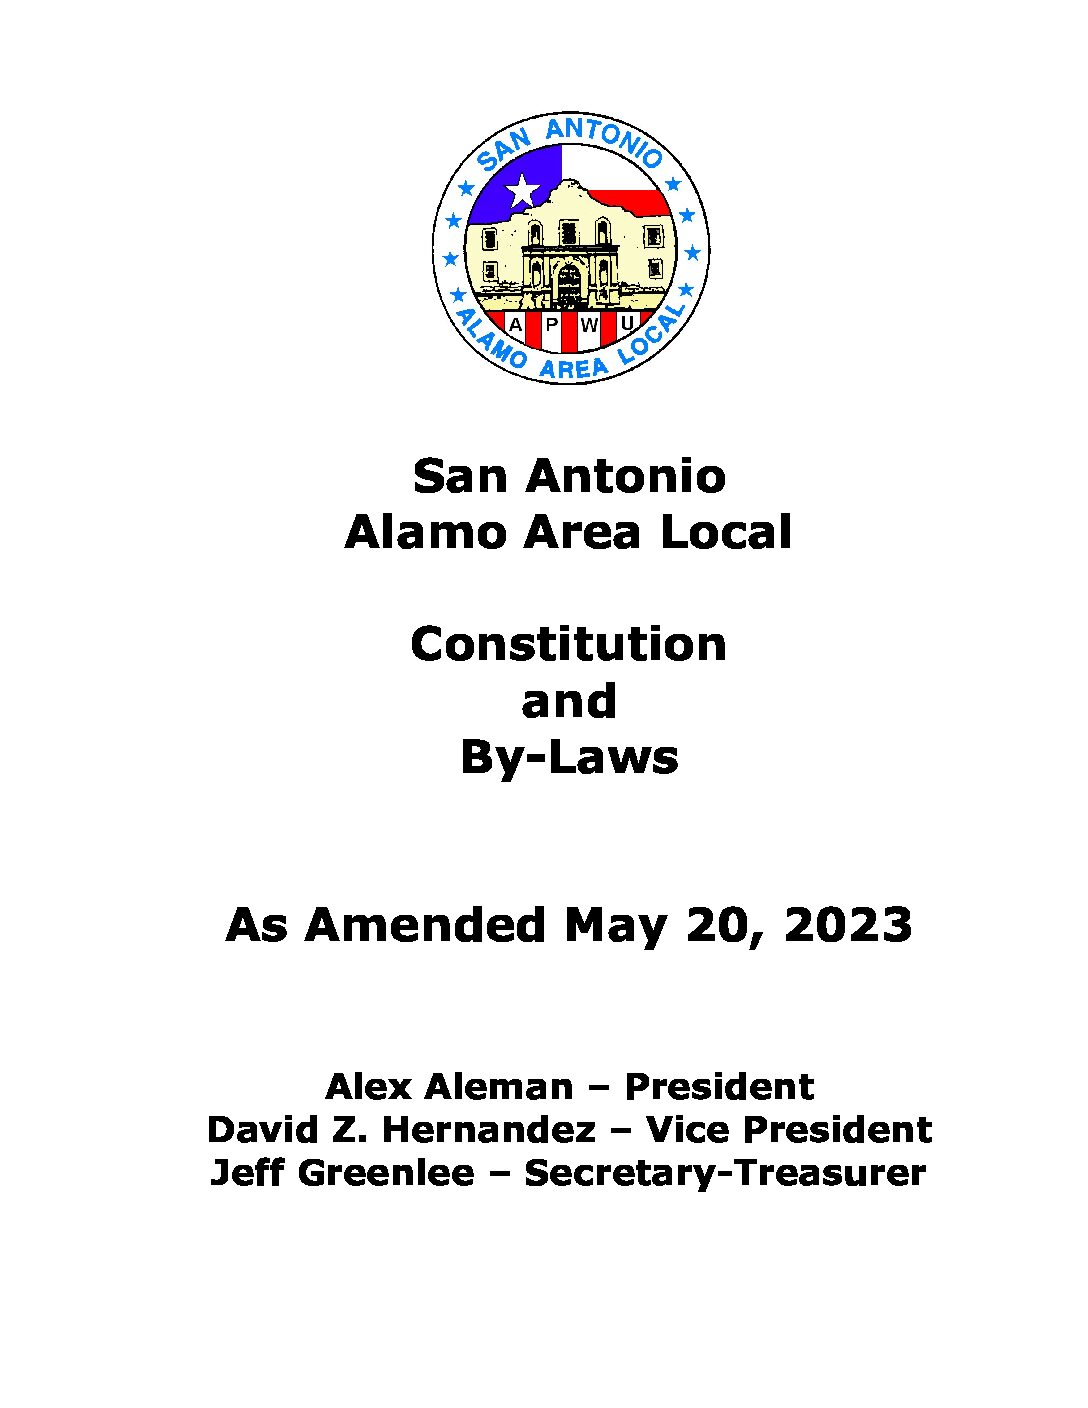 SAAAL Constitution as Amended 5/20/23 - 